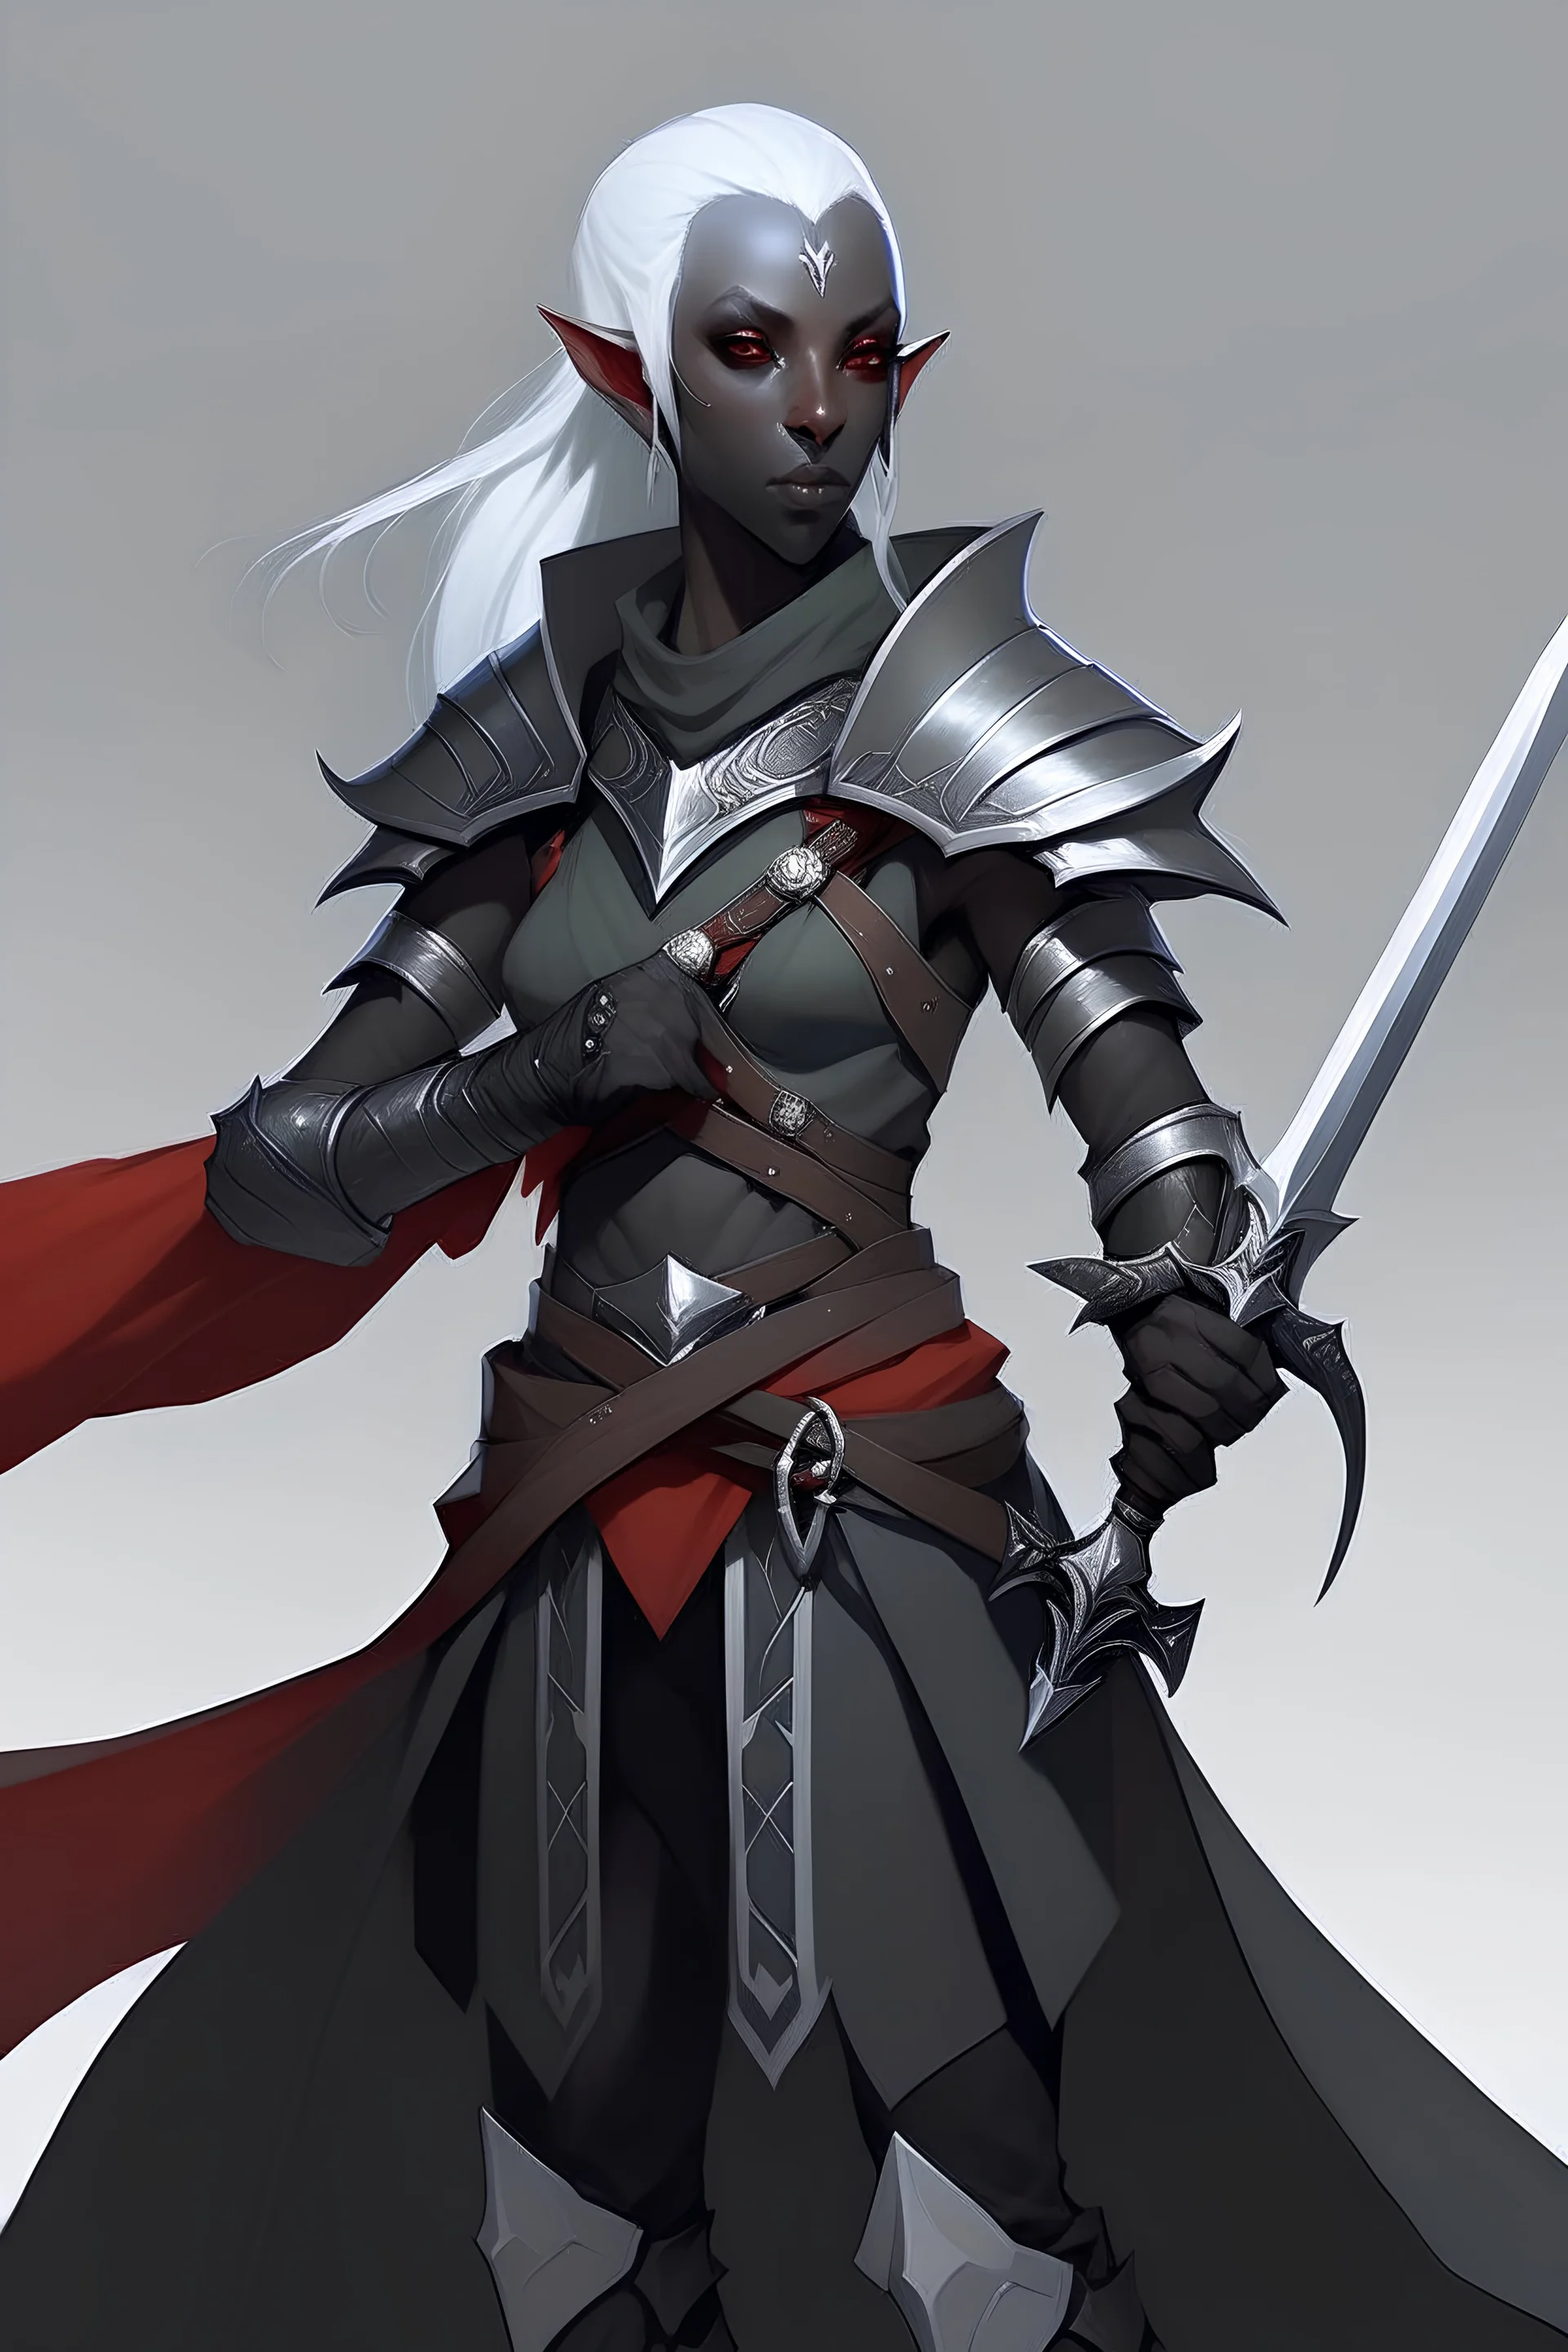 Drow elf wearing Christmas simple leather holding a great sword with both hands